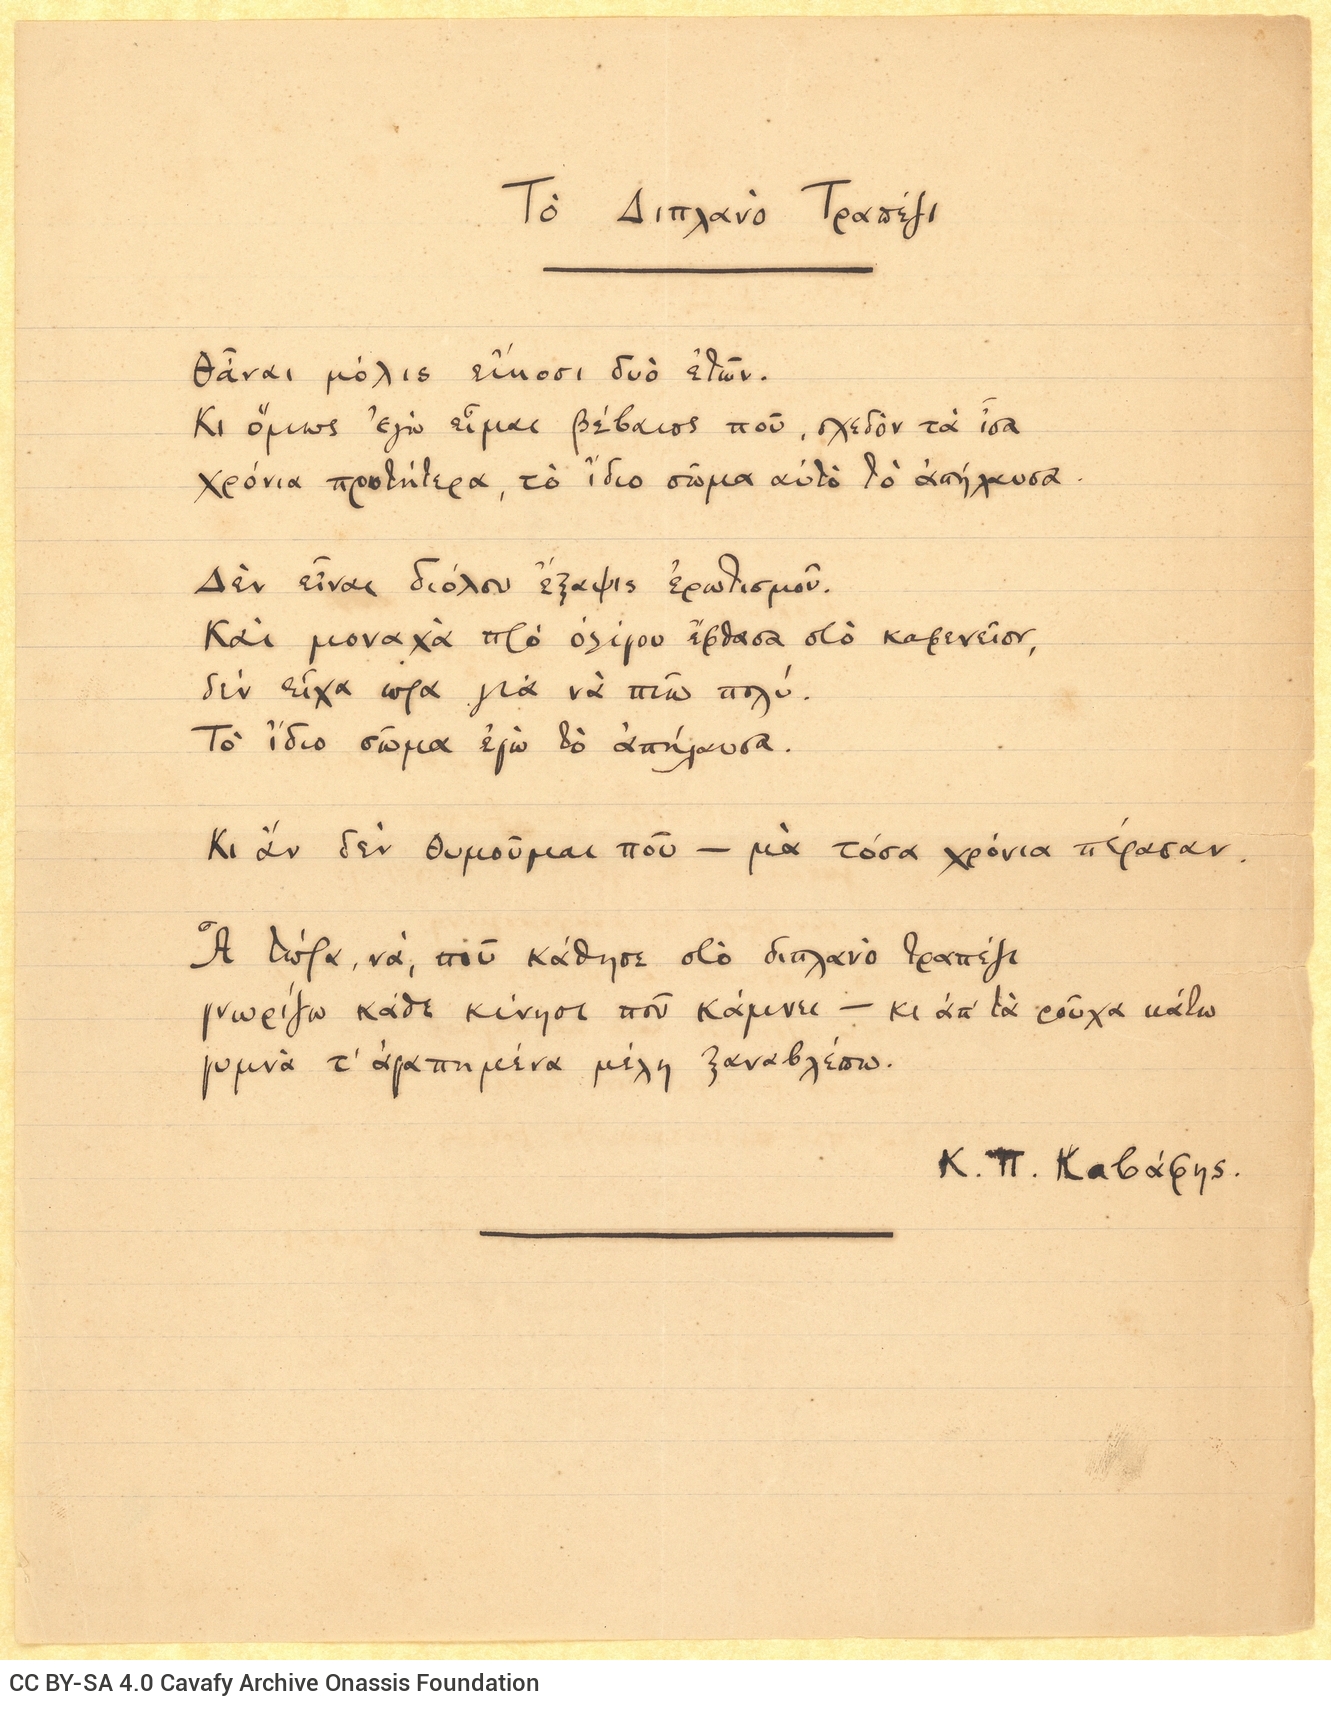 Manuscript of the poem "The Next Table" on one side of a ruled sheet, signed by the poet. Blank verso.